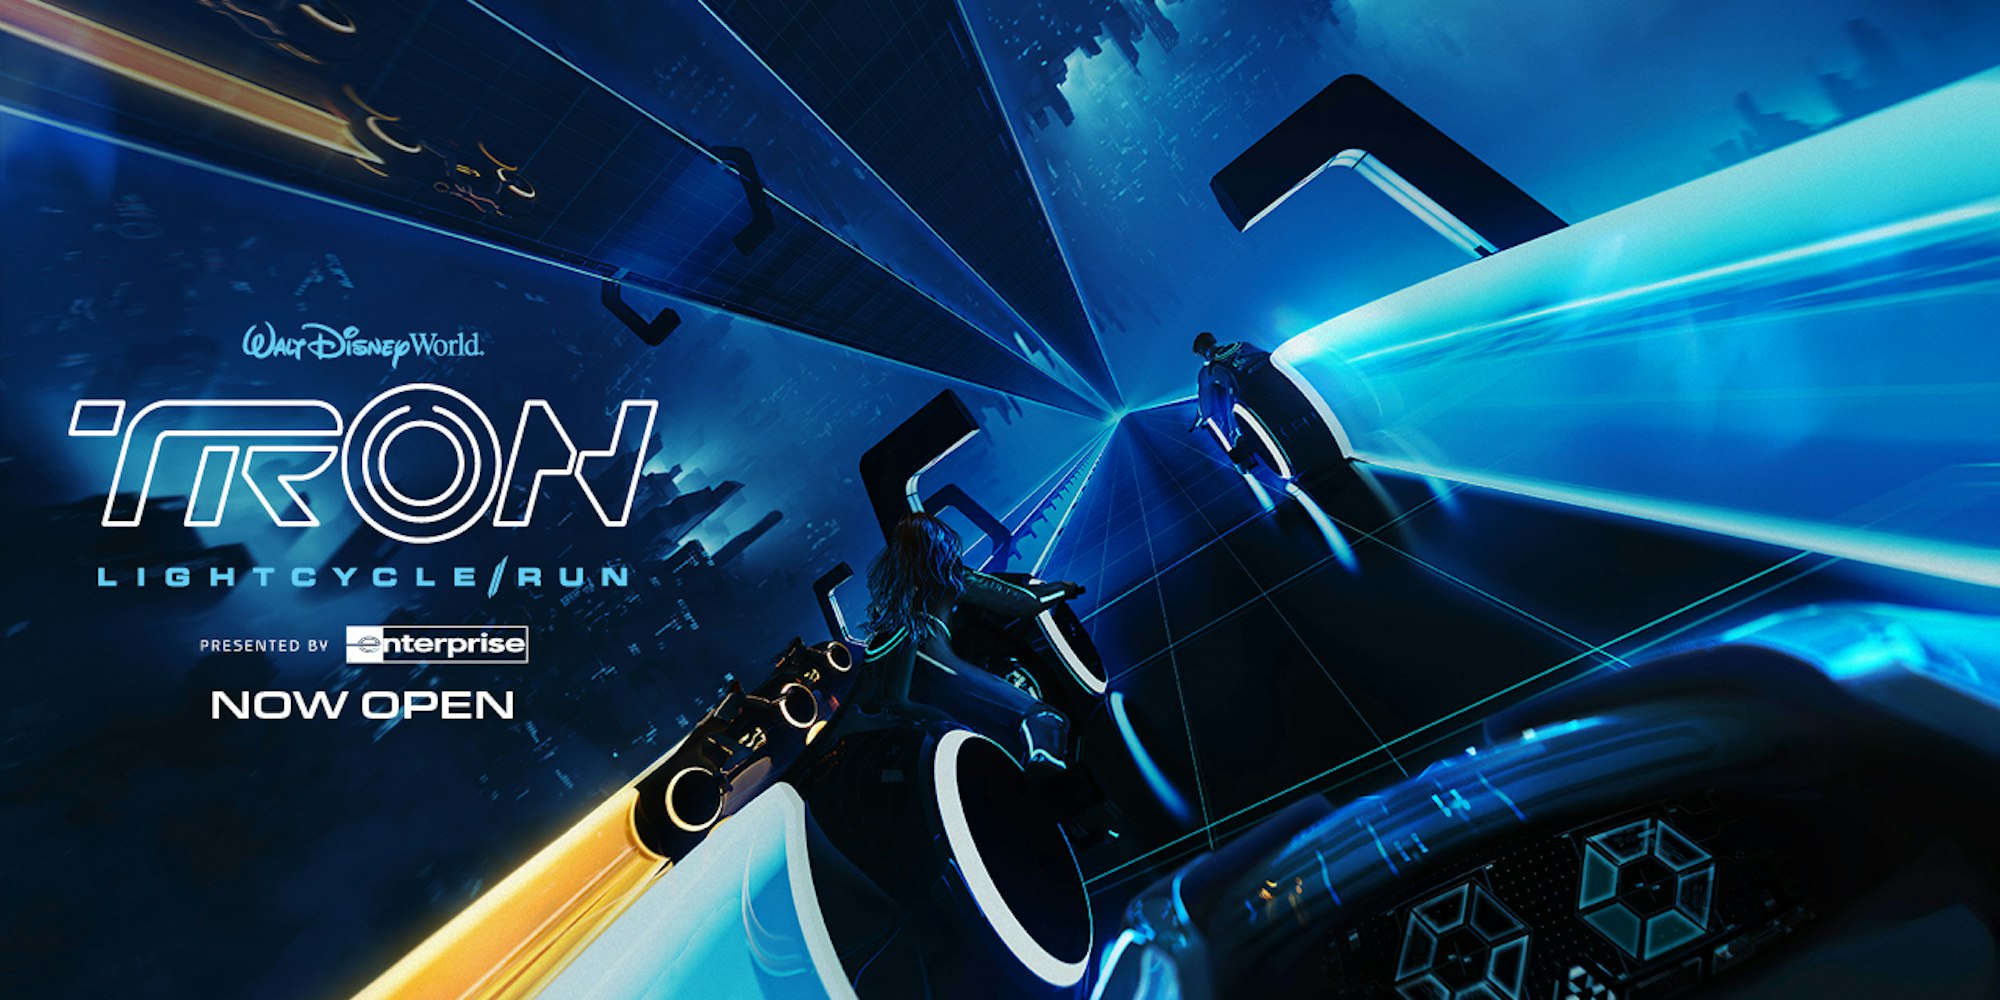 Cover Image for TRON Lightcycle / Run at Magic Kingdom